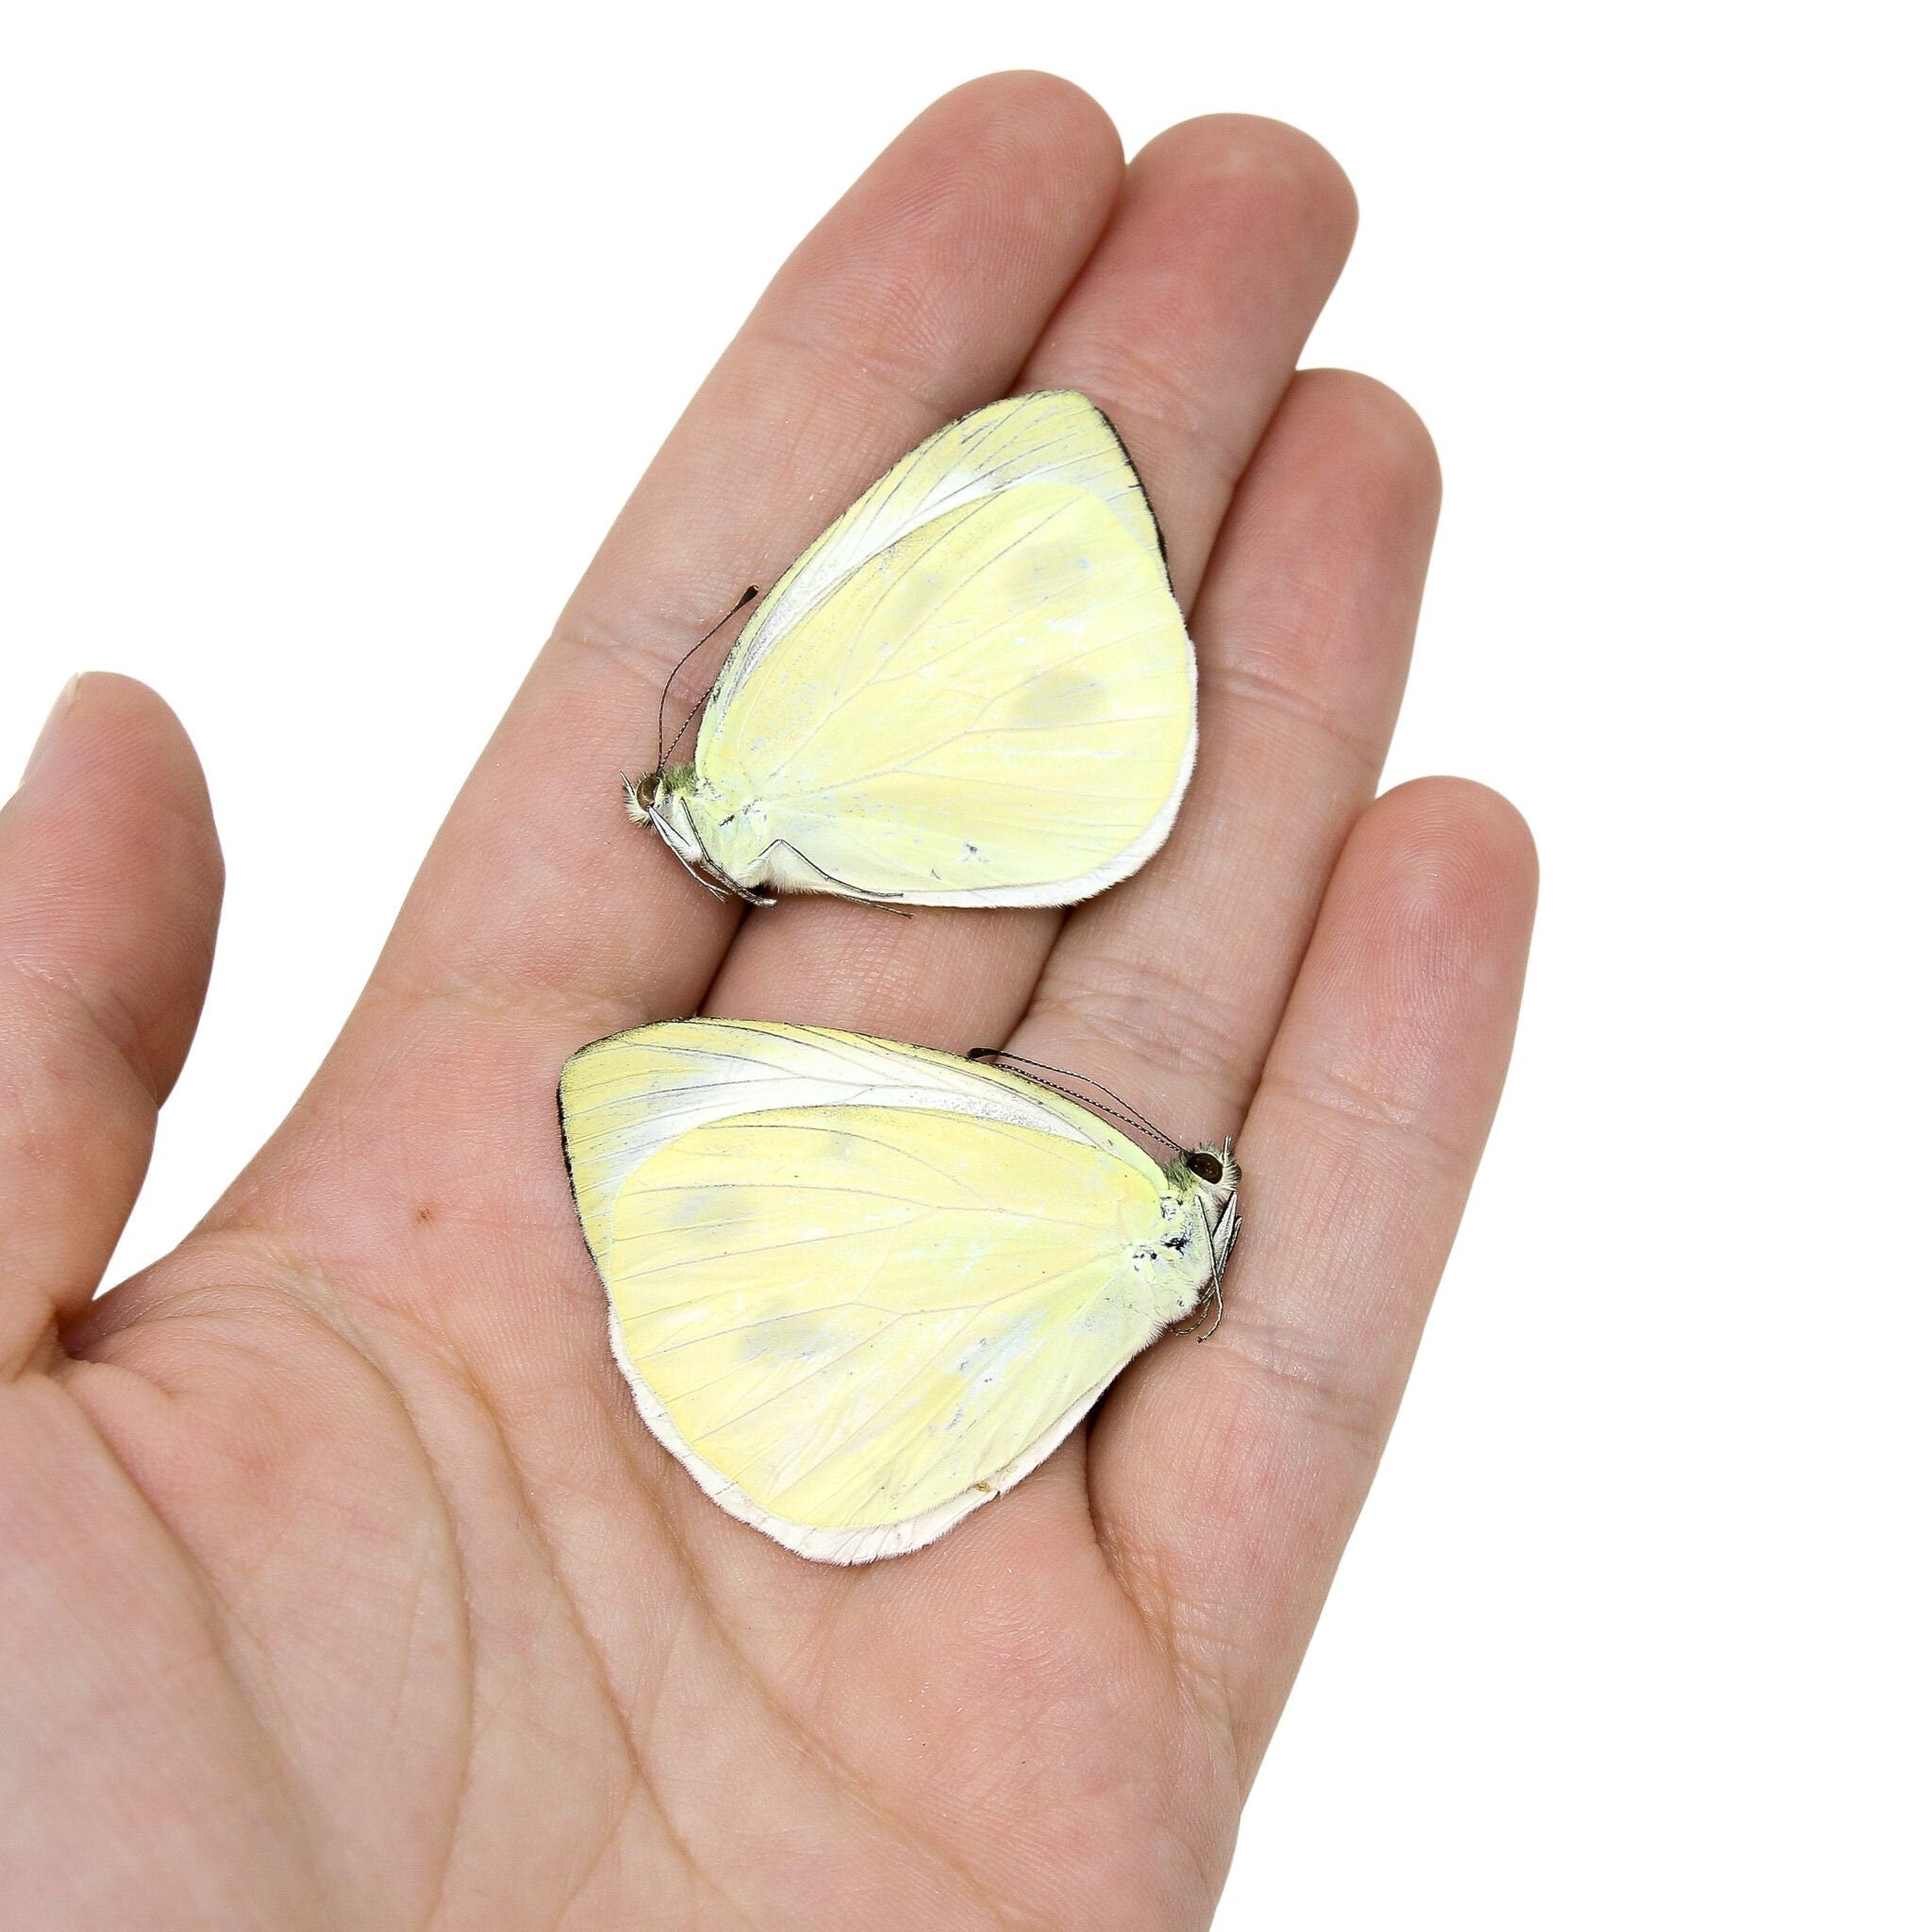 Two (2) Pieris candia, WHITE Butterflies, A1 Real Dry-Preserved Butter 